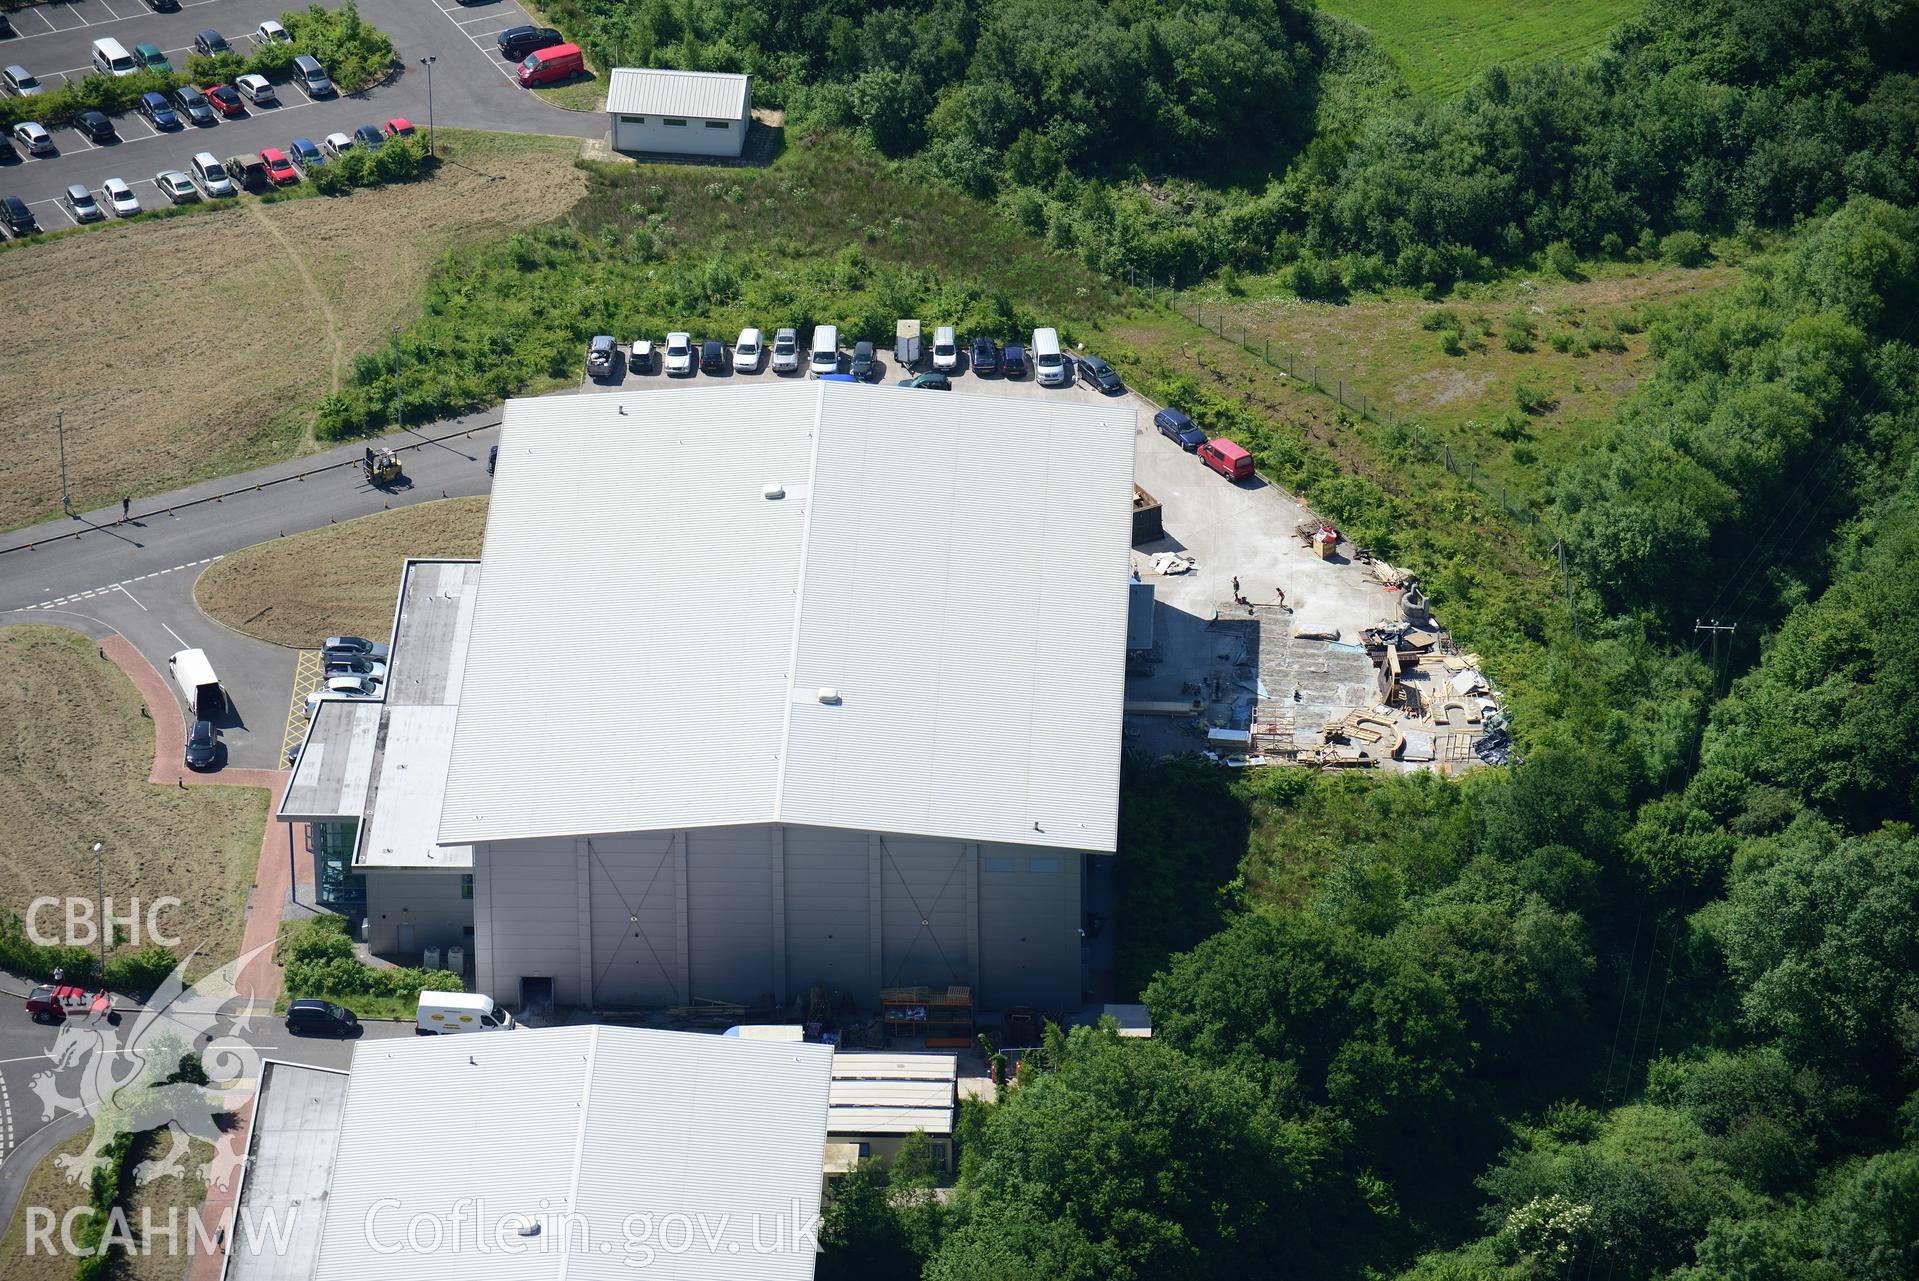 Dragon International Studios also known as 'Valleywood'. Oblique aerial photograph taken during the Royal Commission's programme of archaeological aerial reconnaissance by Toby Driver on 19th June 2015.